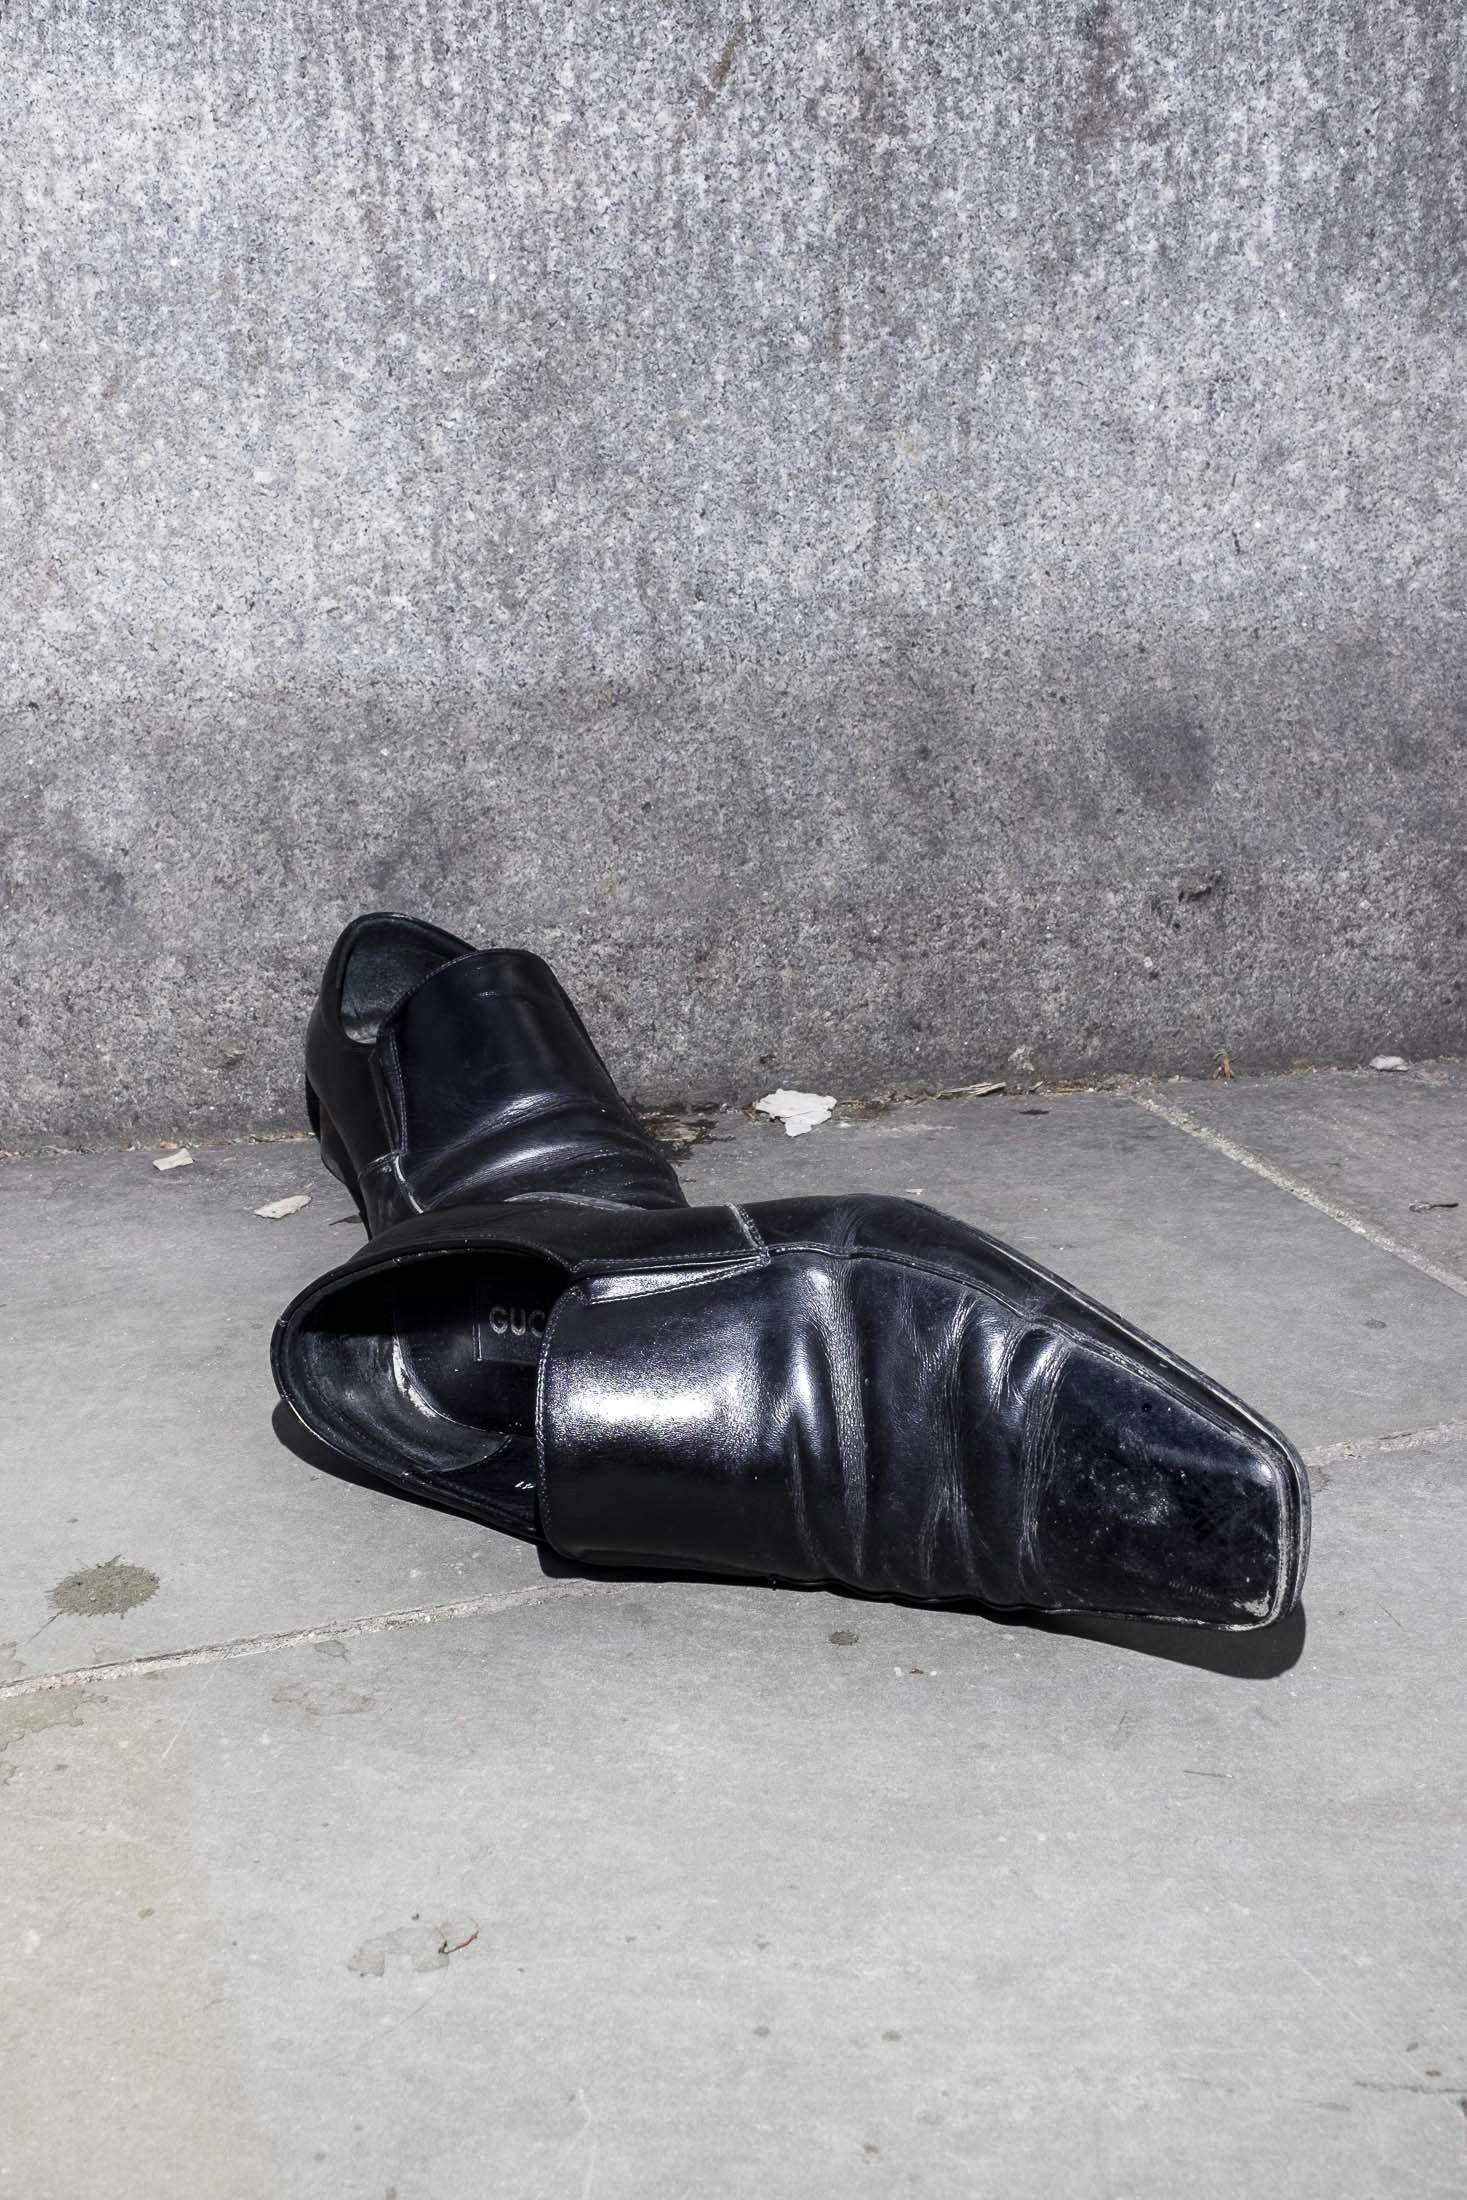 Discarded Gucci shoes in central london